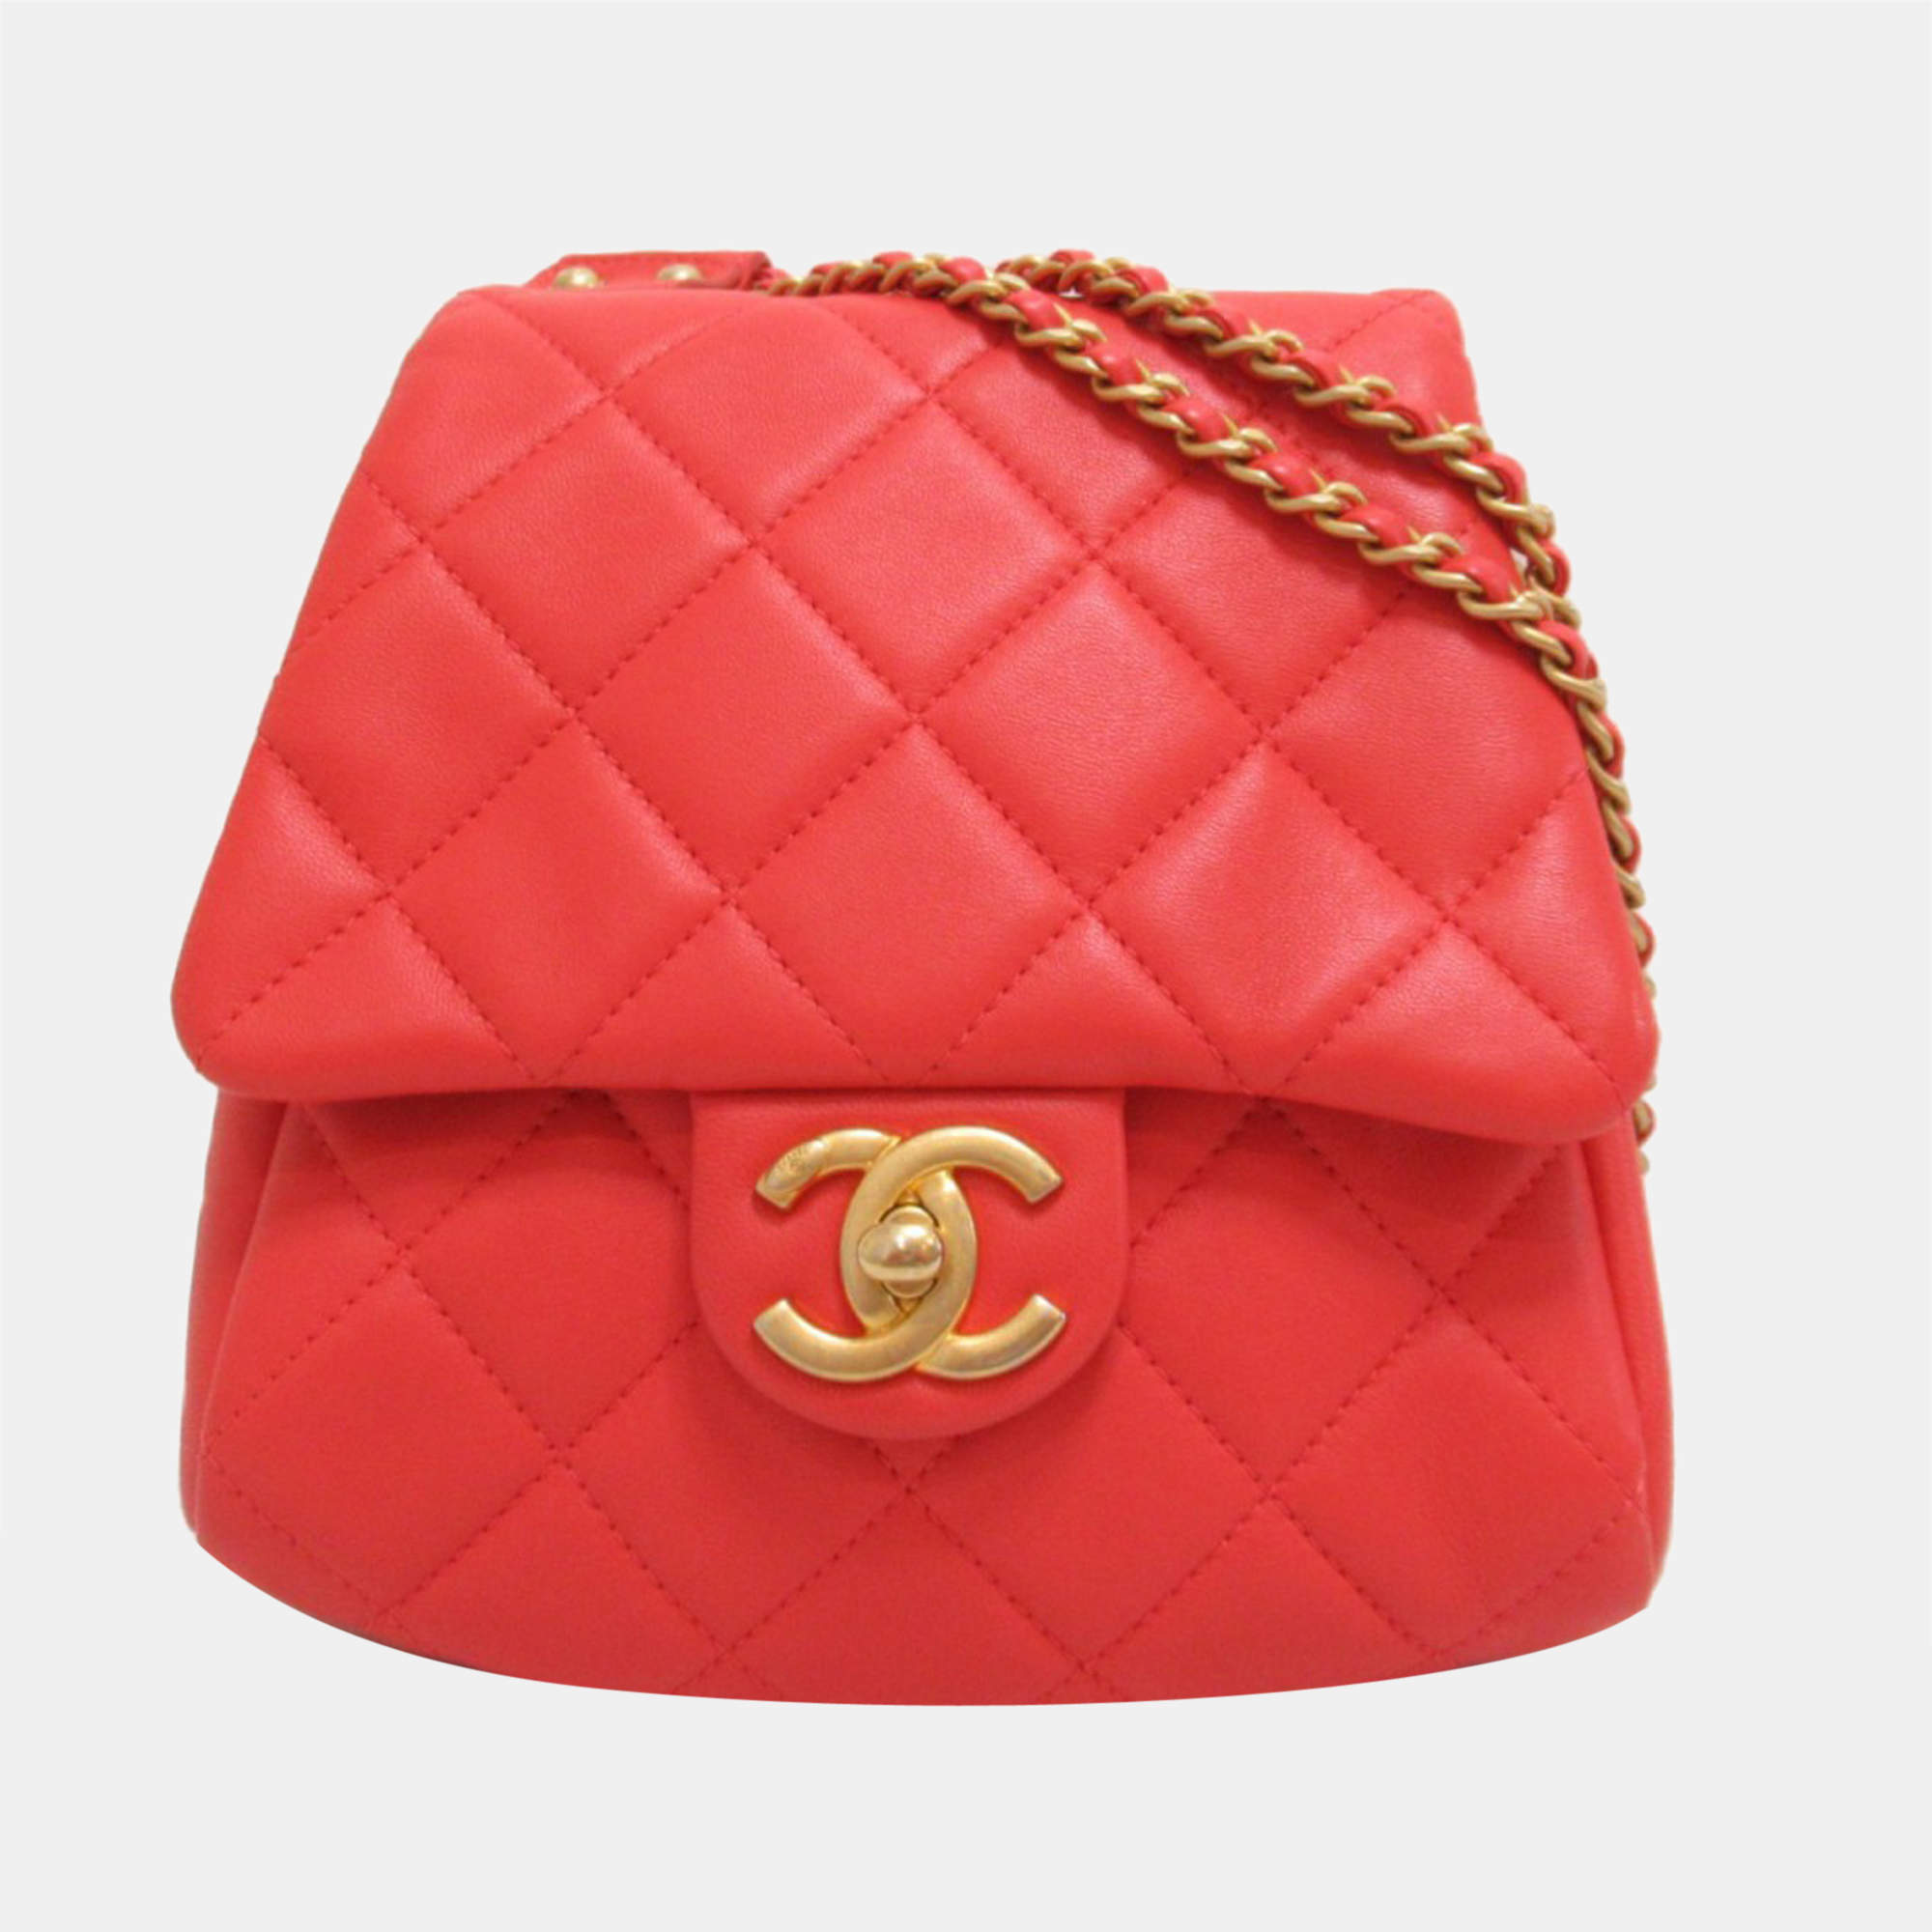 WHAT'S IN MY CHANEL MINI SQUARE FLAP BAG